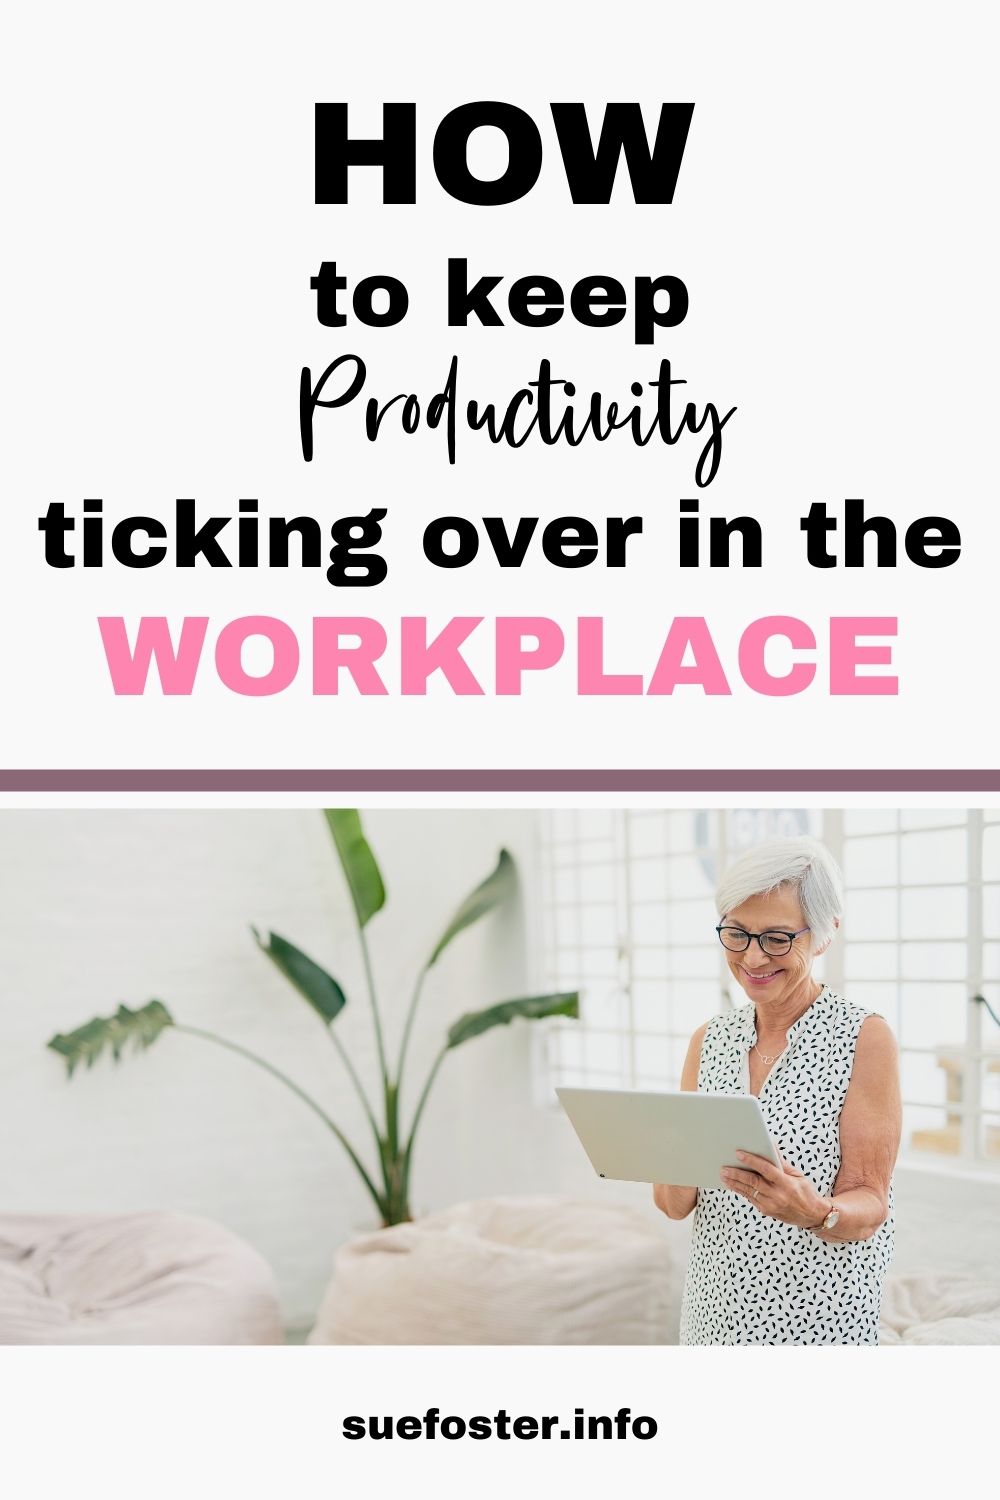 When it comes to working in a professional environment, productivity is paramount. Follow these tips to help keep productivitiy ticking over.